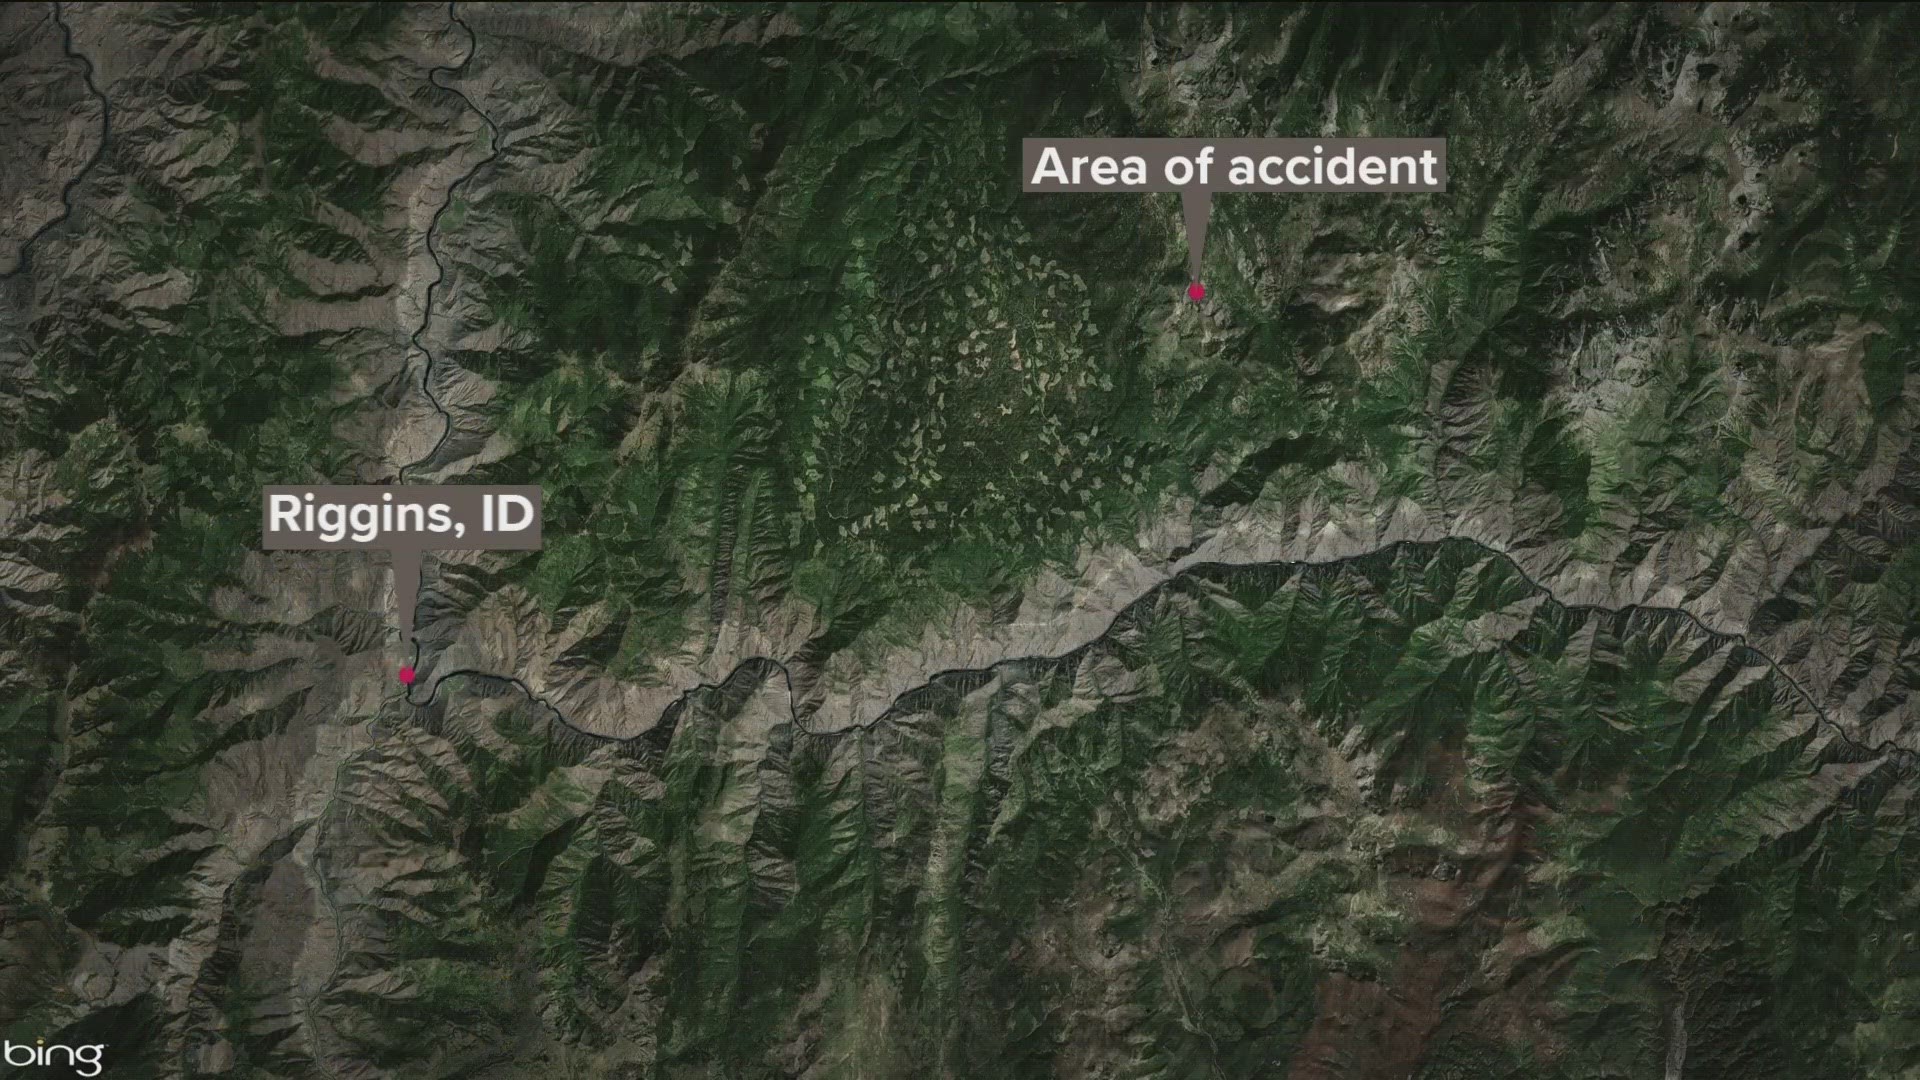 He sustained a severe head injury, hurt both ankles, a knee and a hip, the Idaho County Sheriff's Office said.